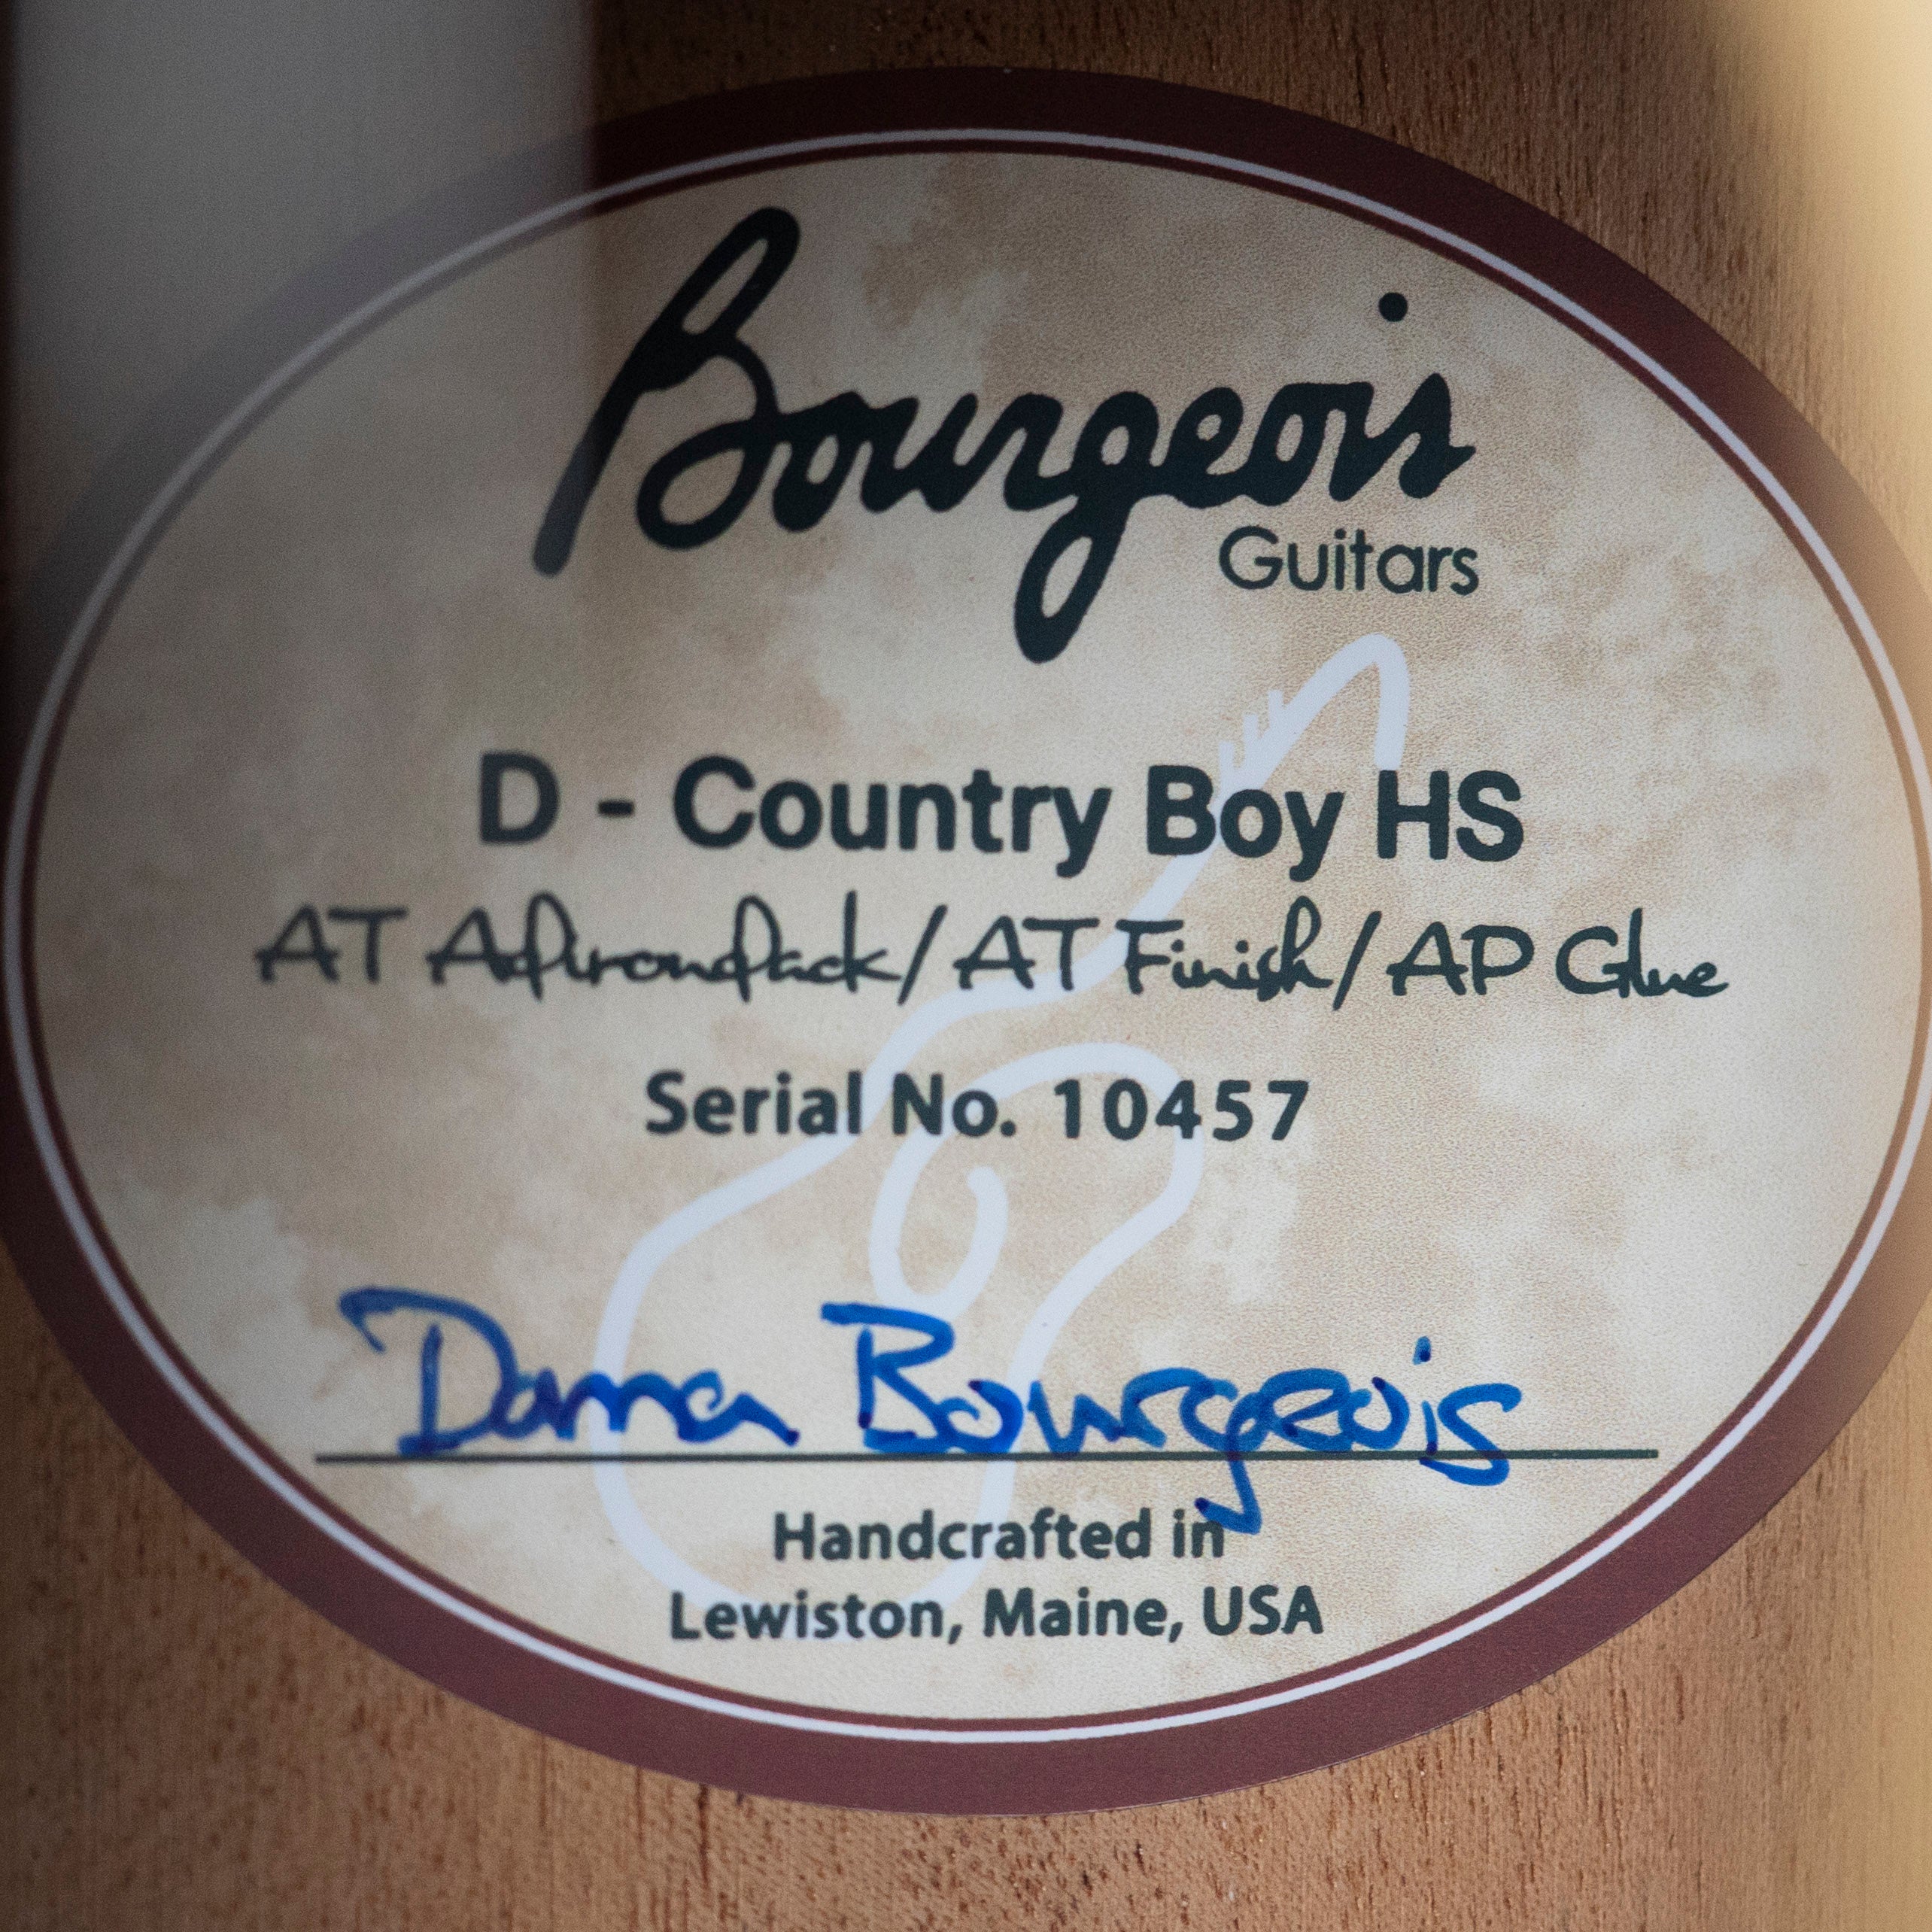 Bourgeois D Country Boy Heirloom Series